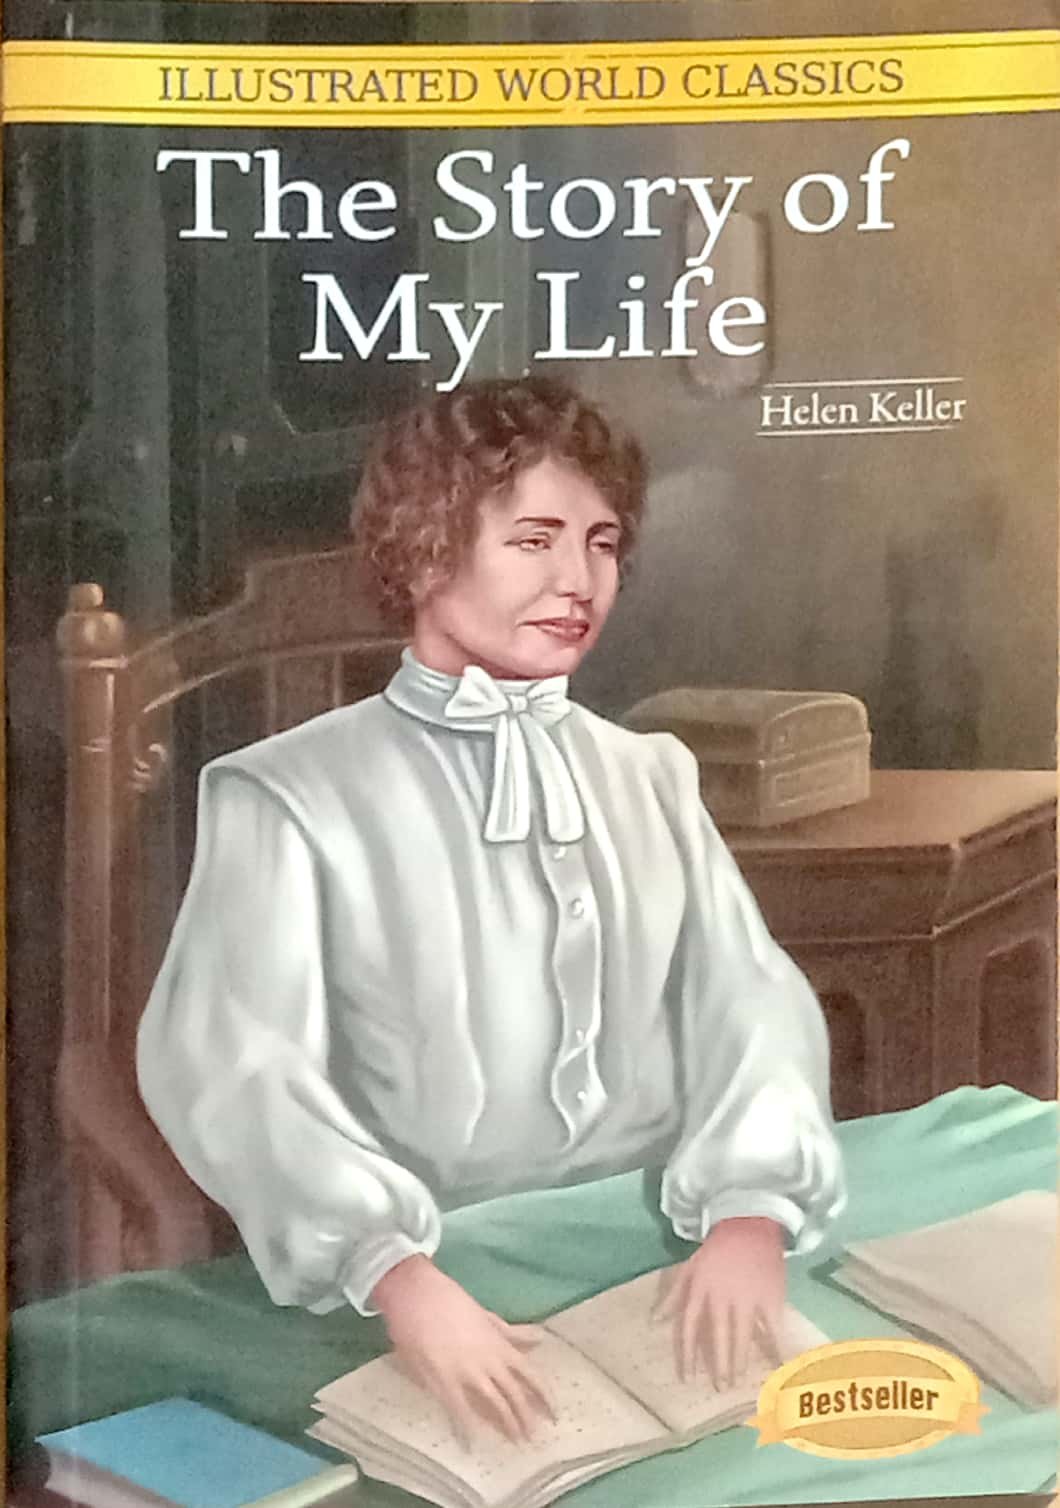 book review on the story of my life